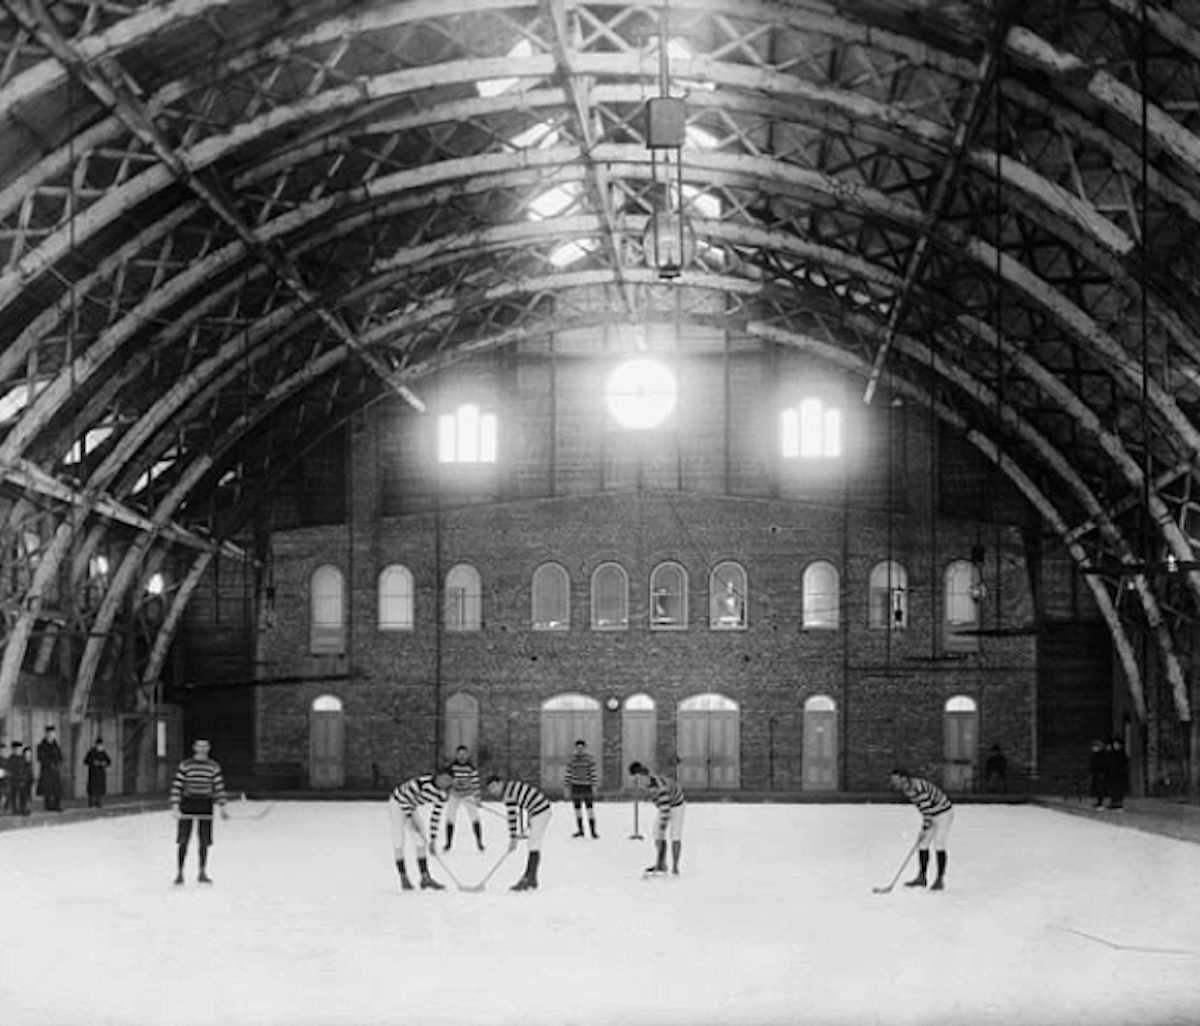 Referees on an ice rink inside a vintage arched-roof building.